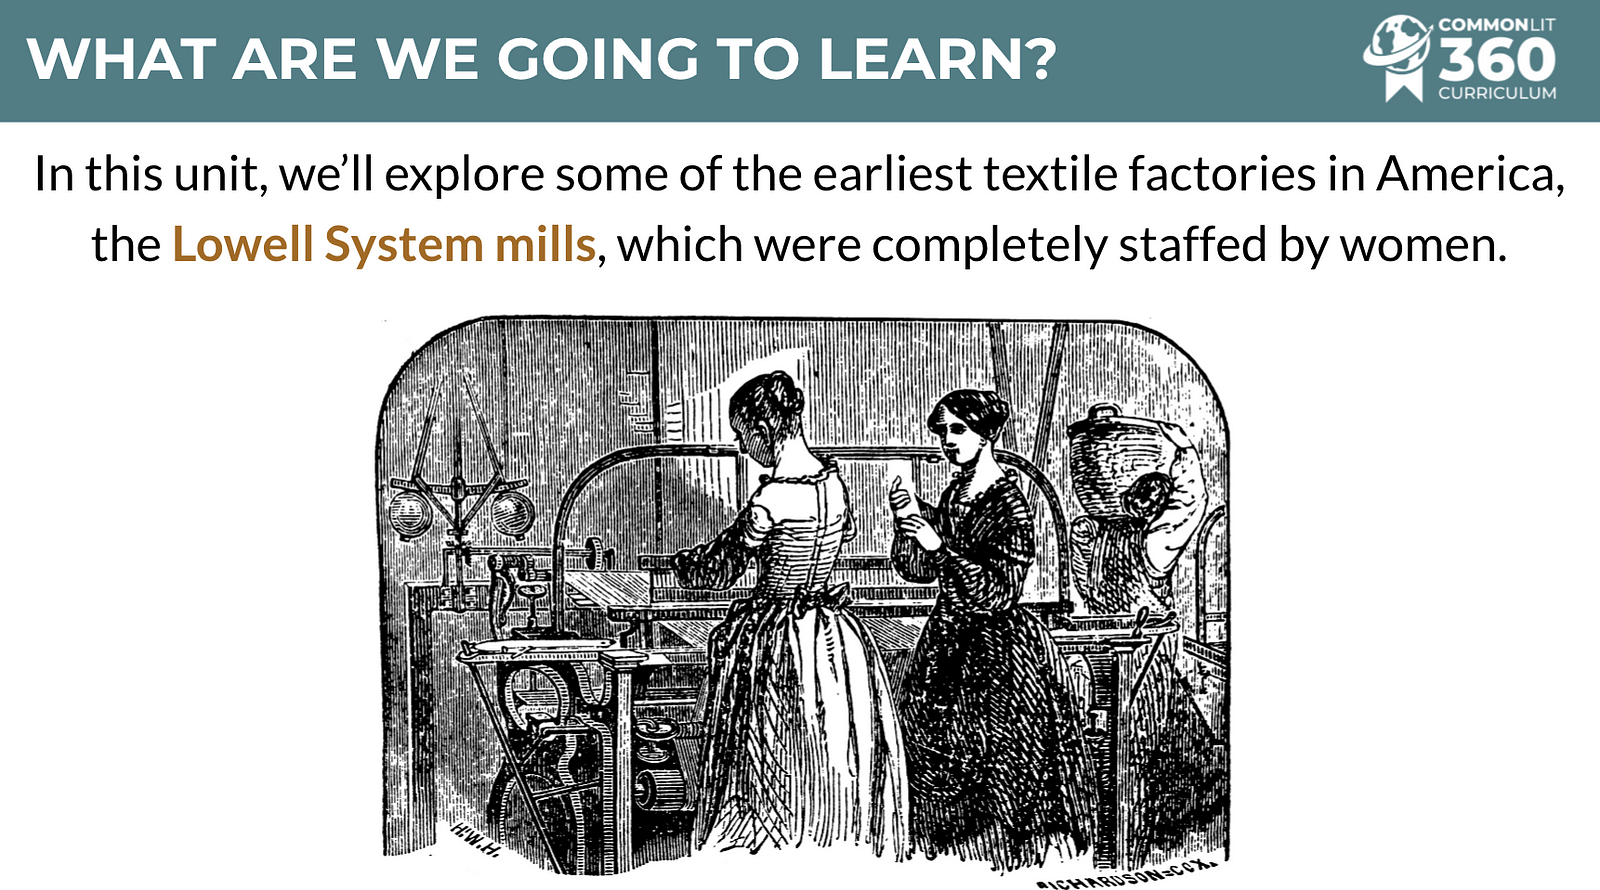 A slide from a CommonLit 360 lesson that says "What are we going to learn? In this unit, we'll explore some of the earliest textile factories in America, the Lowell System mills, which were completely staffed by women."